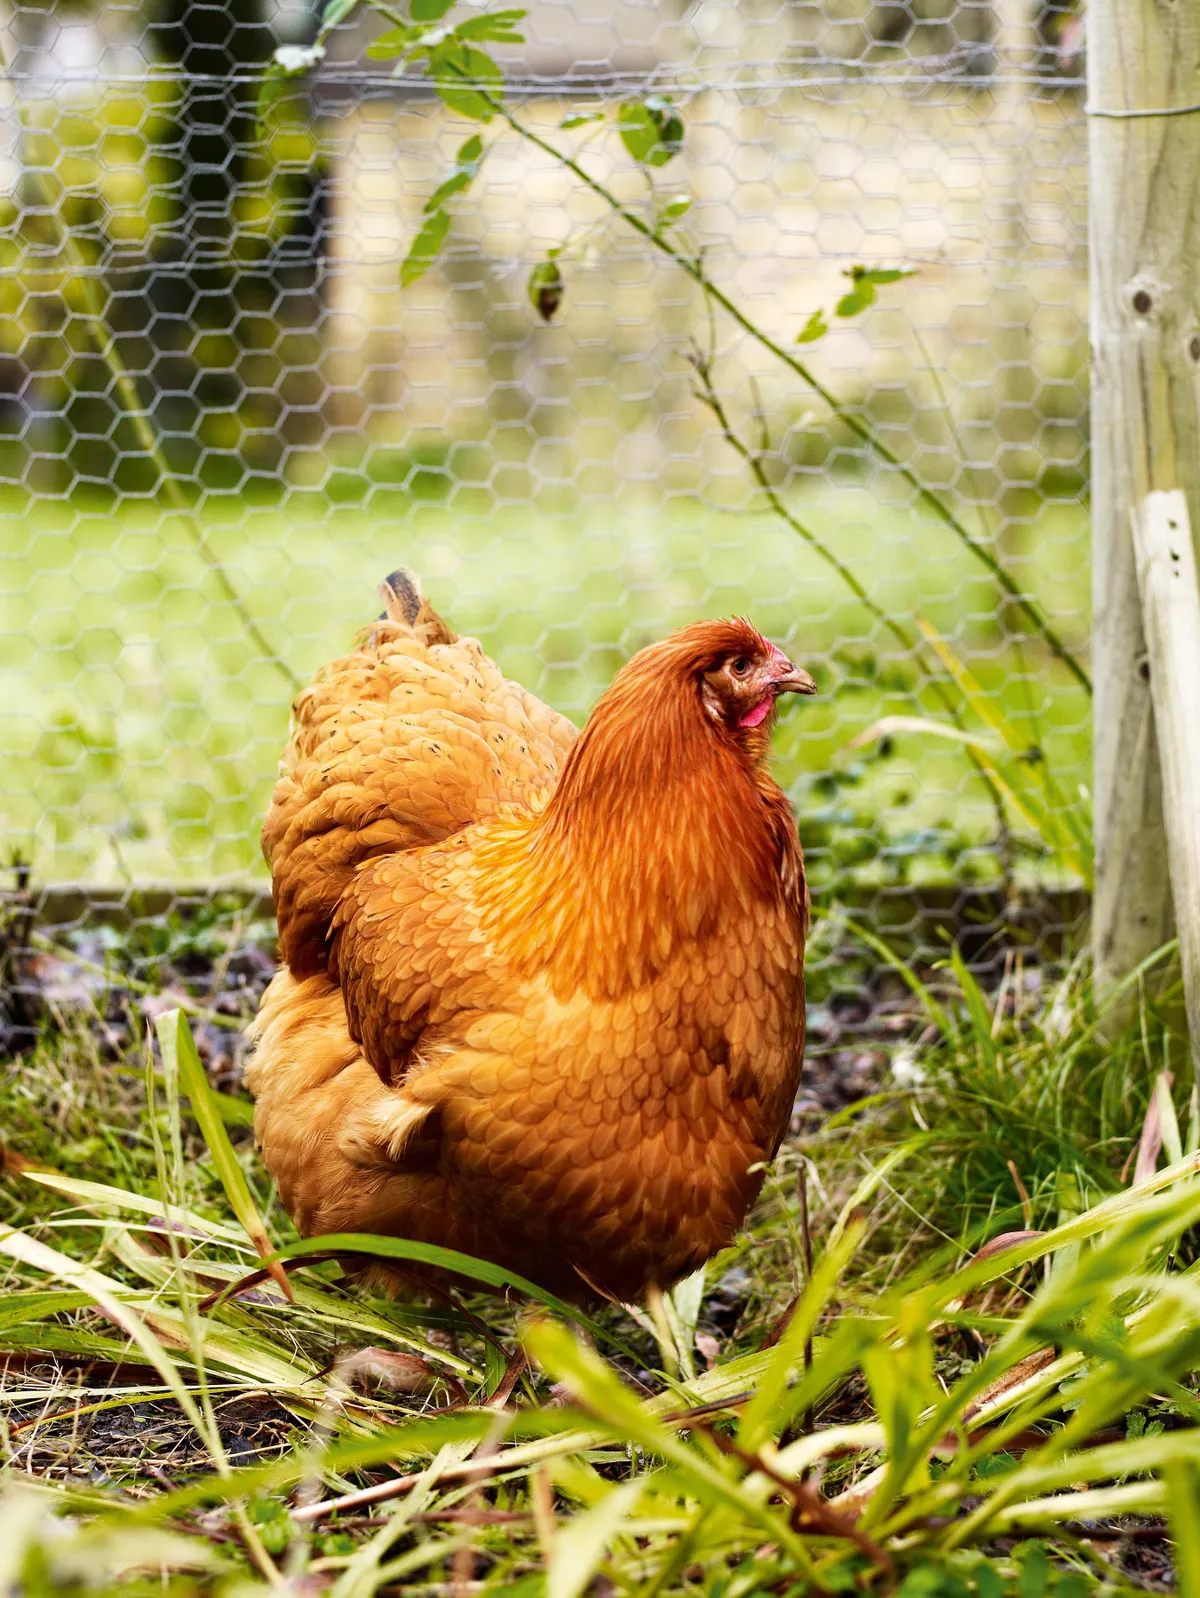 Keeping chickens in the garden